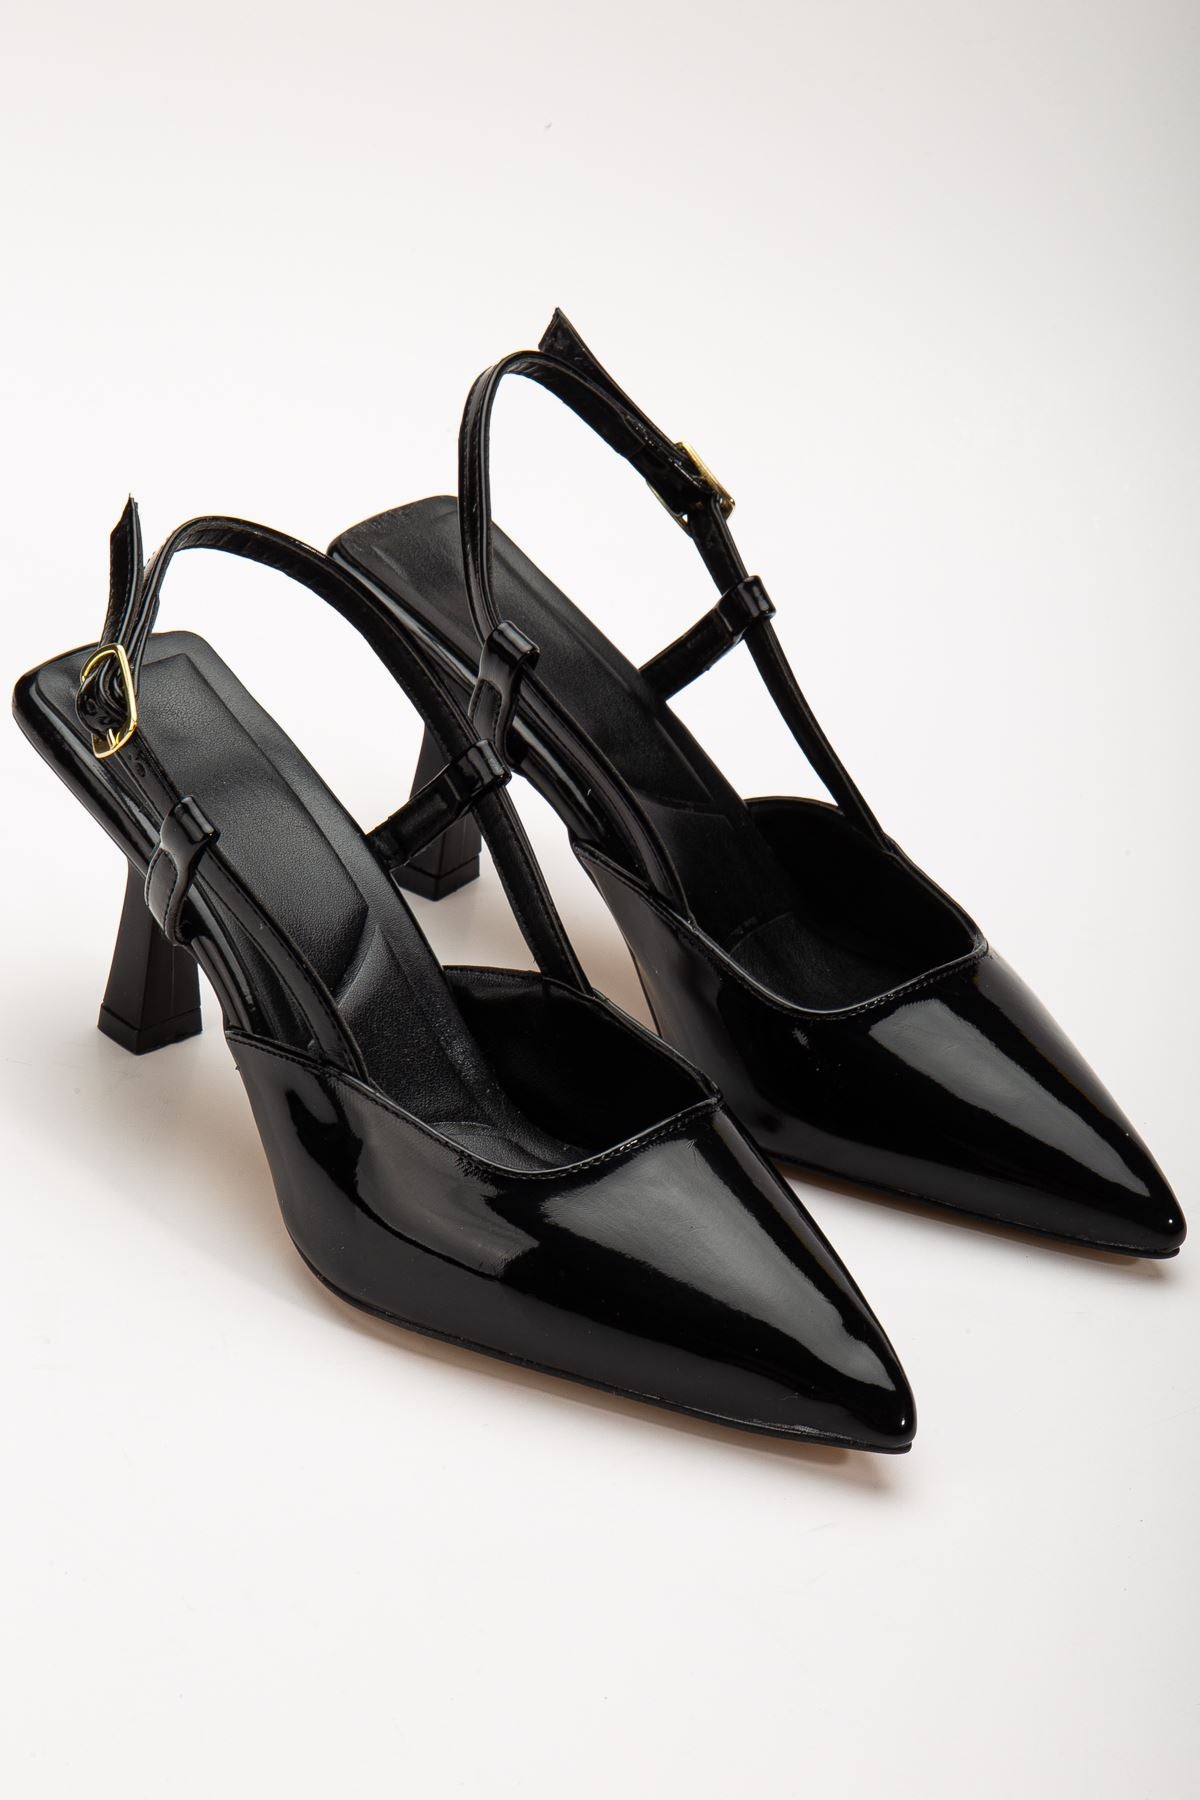 Women's Black Patent Leather Thin Heeled Shoes - STREETMODE™